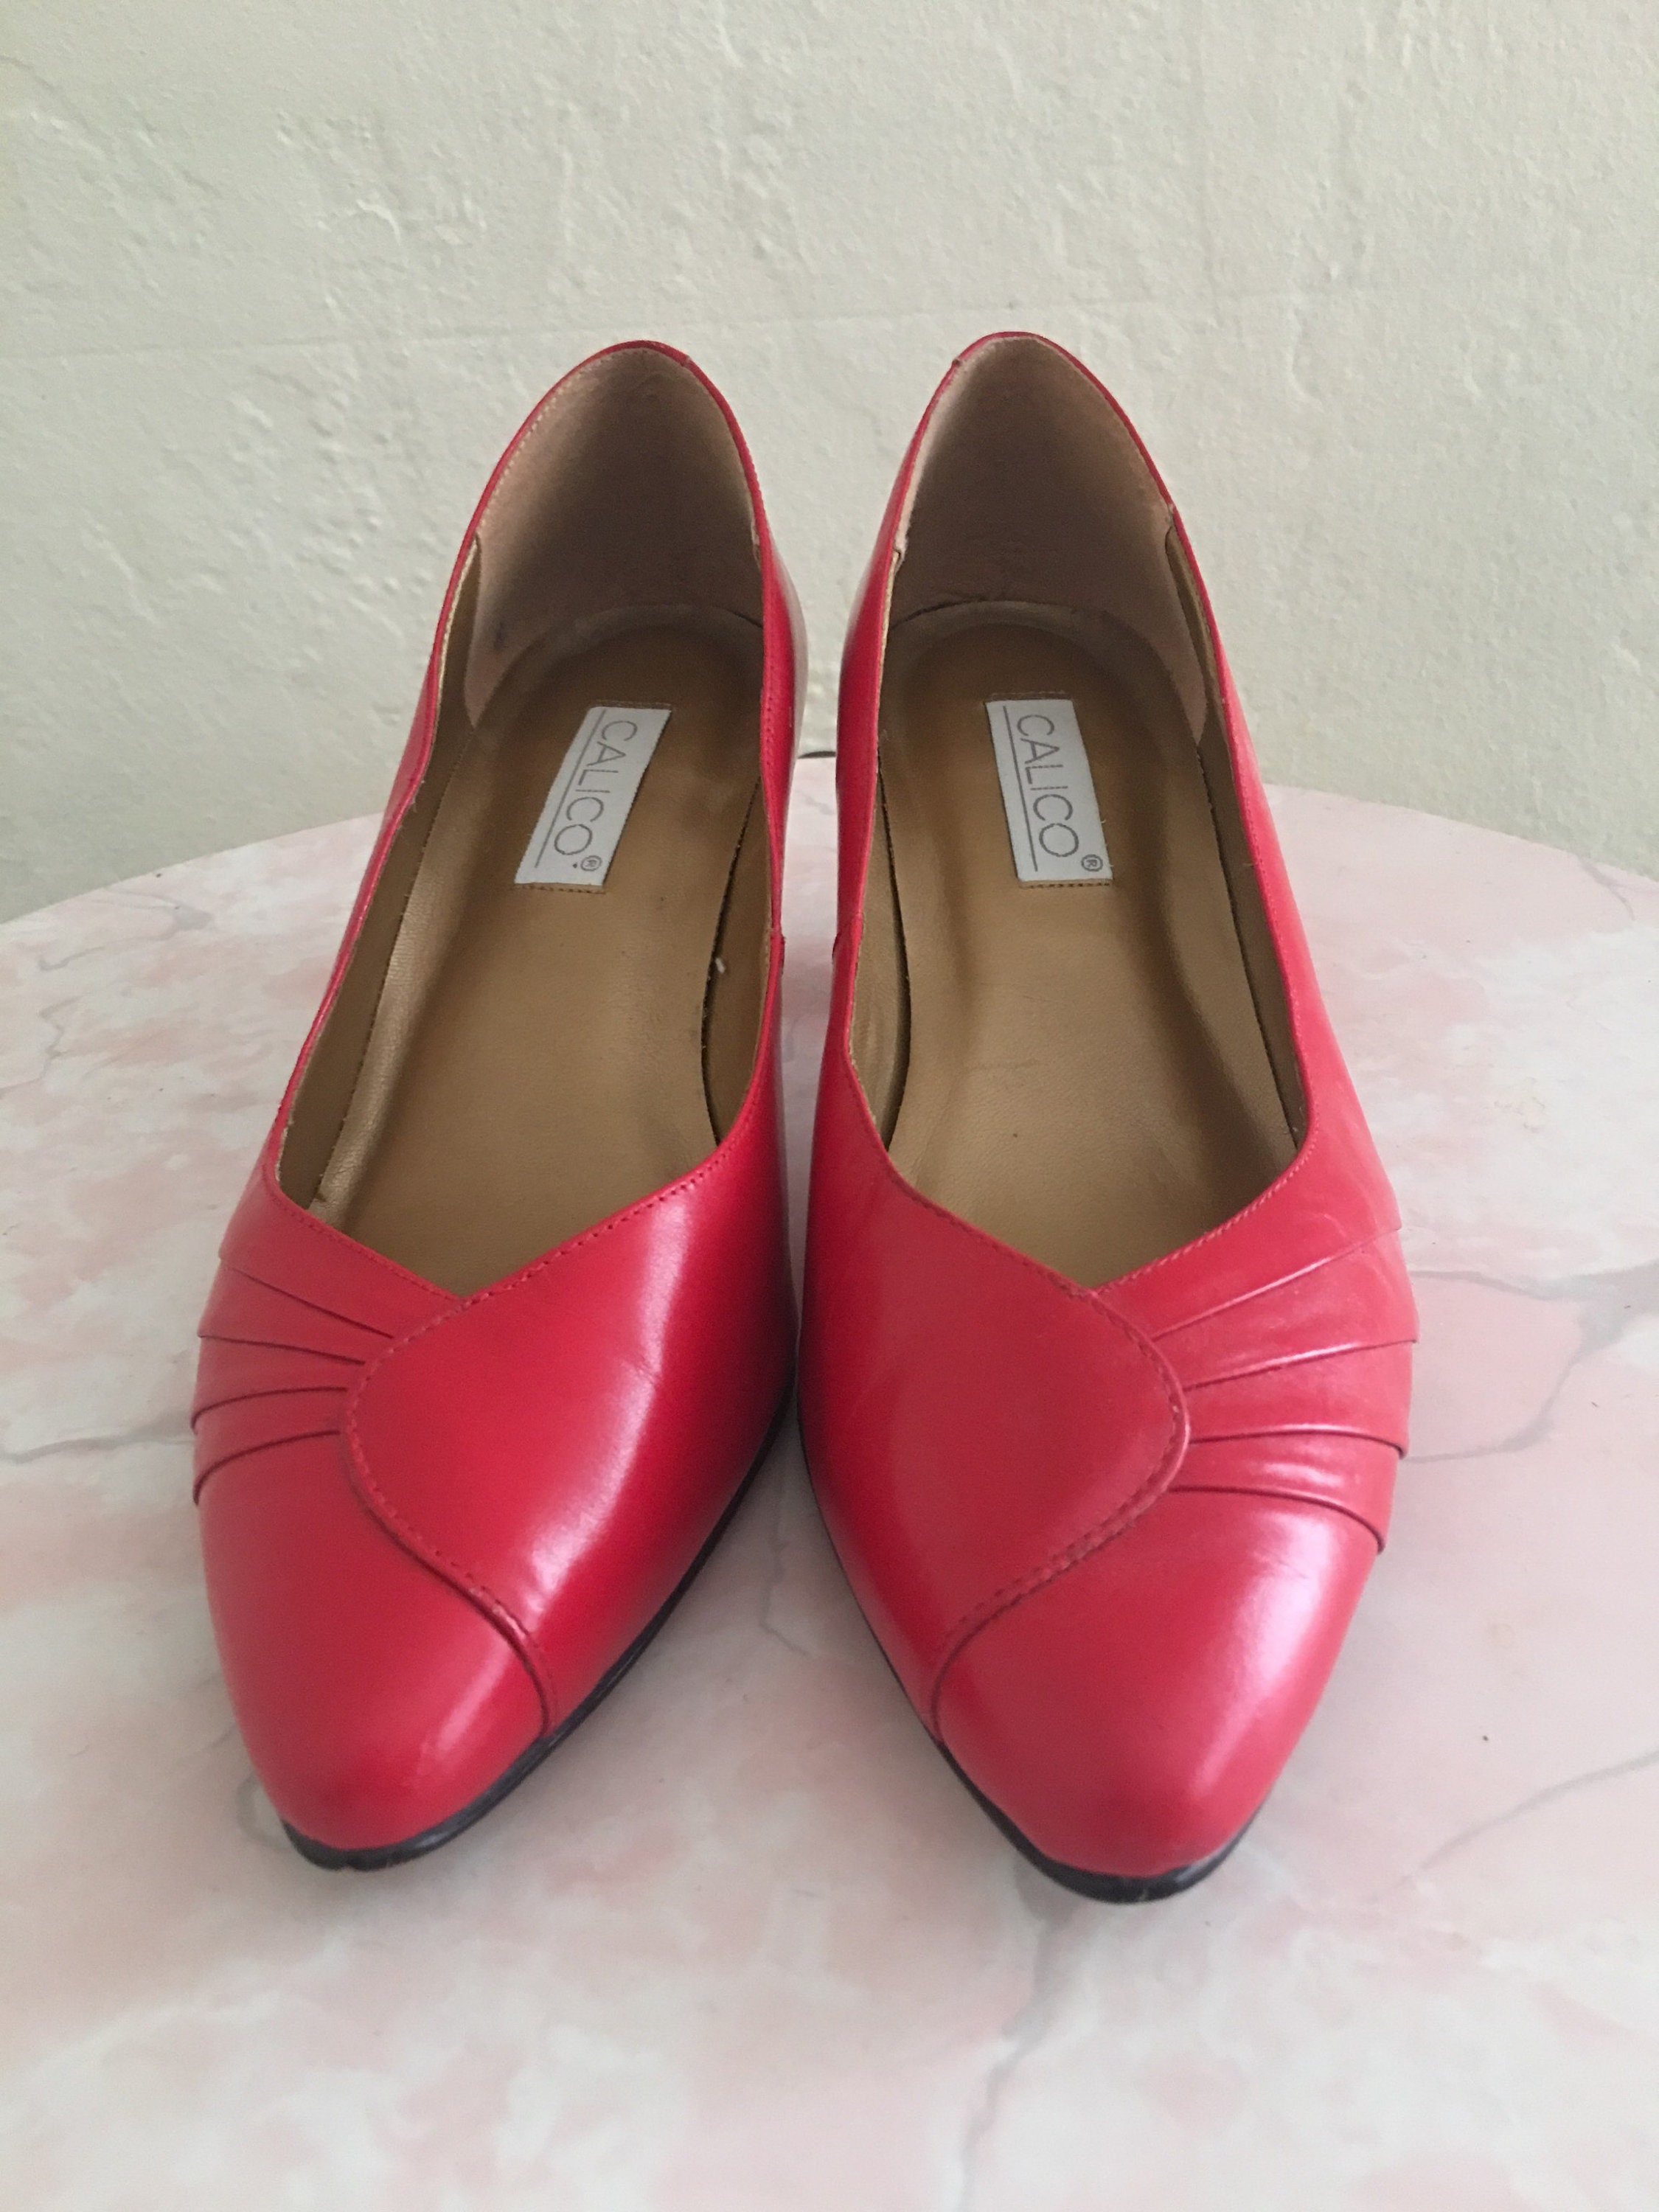 vintage 80's red leather heels // shoe size 8